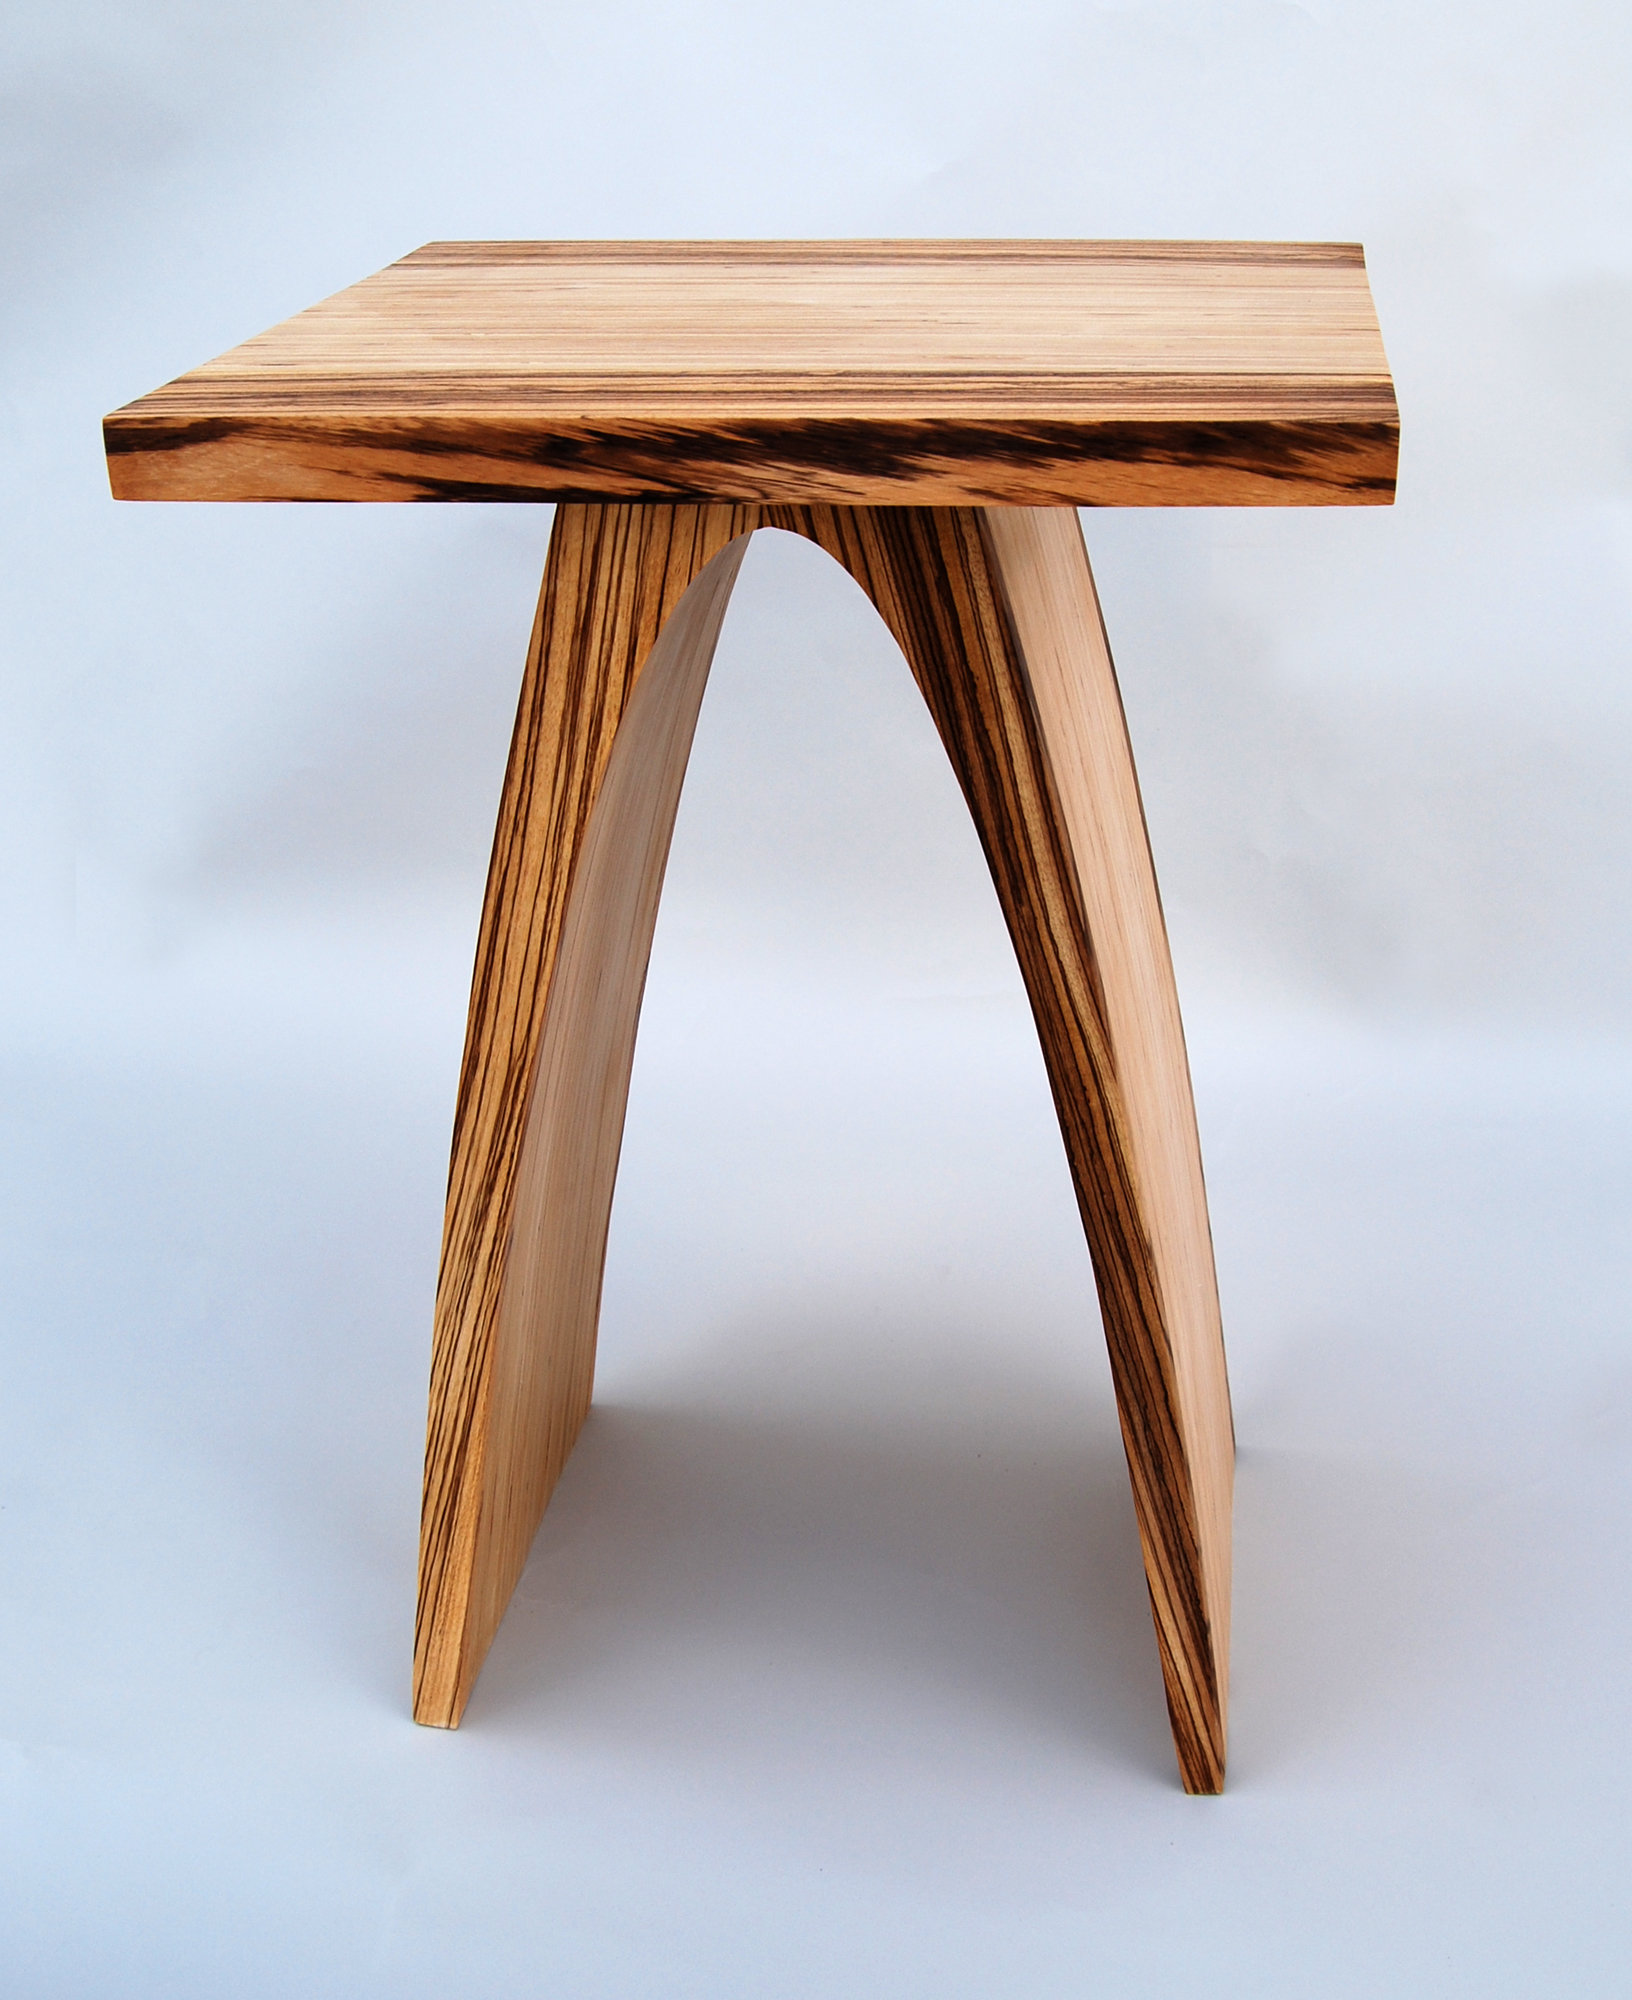 End Table Designs